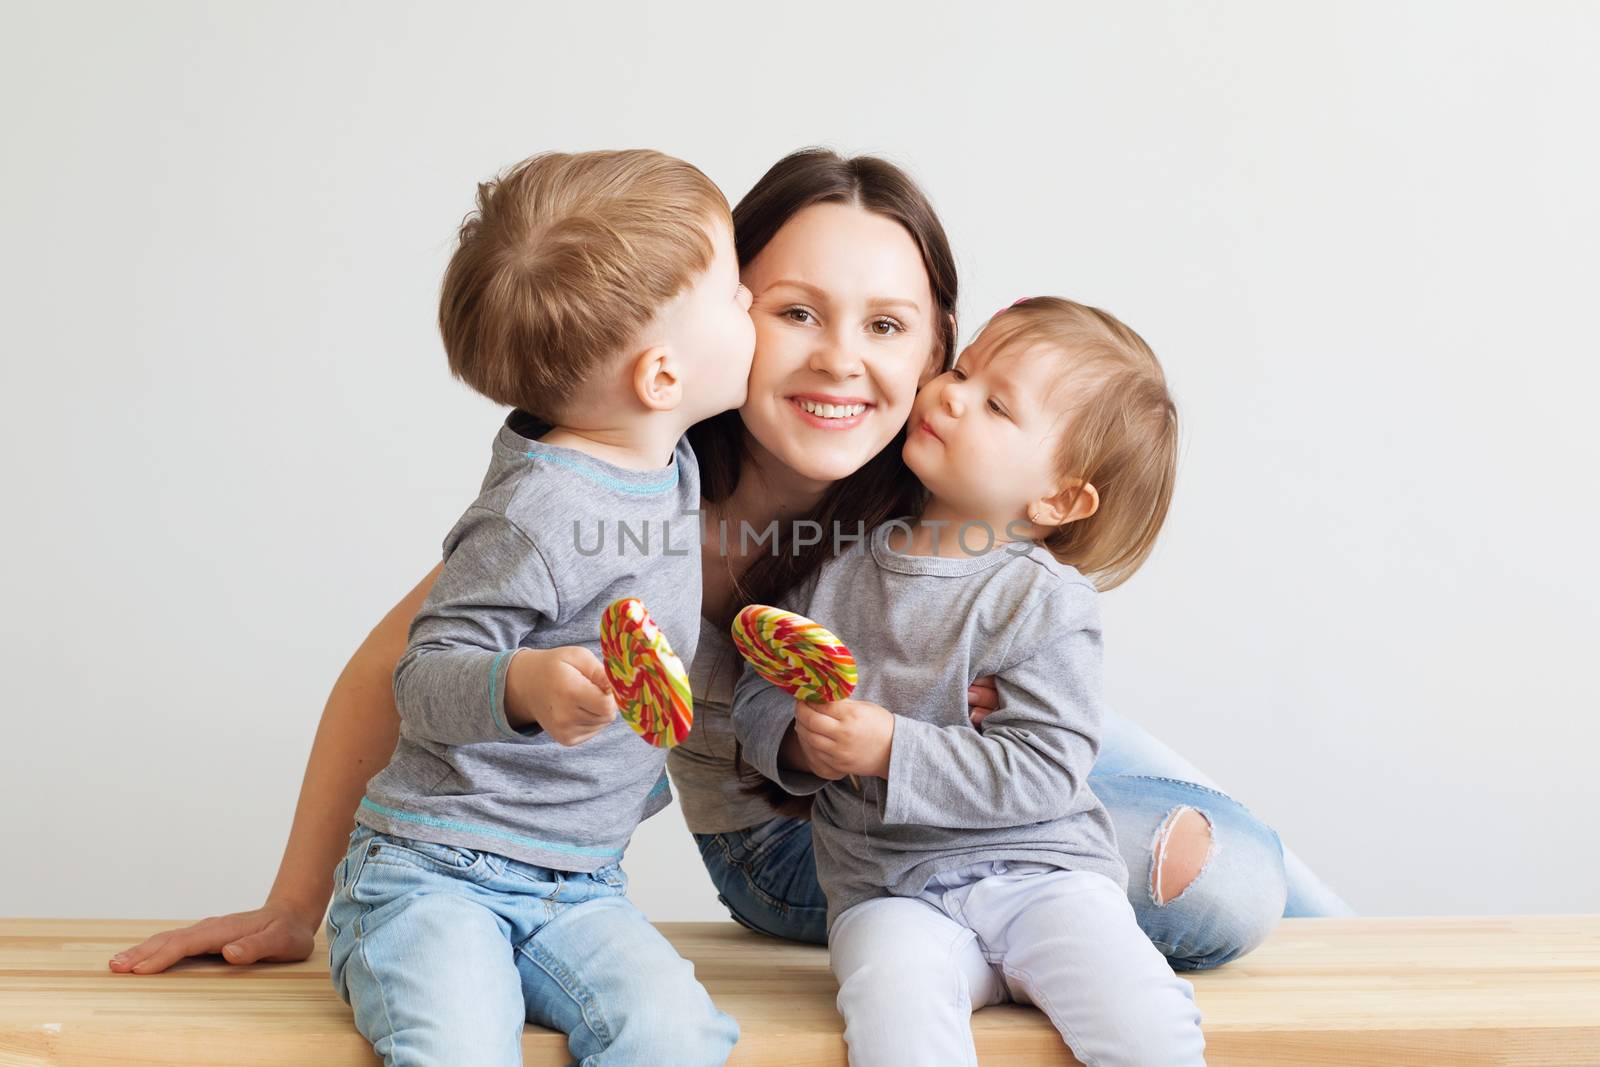 Portrait of a happy mother and her two little children - boy and girl. Happy family against a white background. Little kids kissing mother. Children with lollipops.